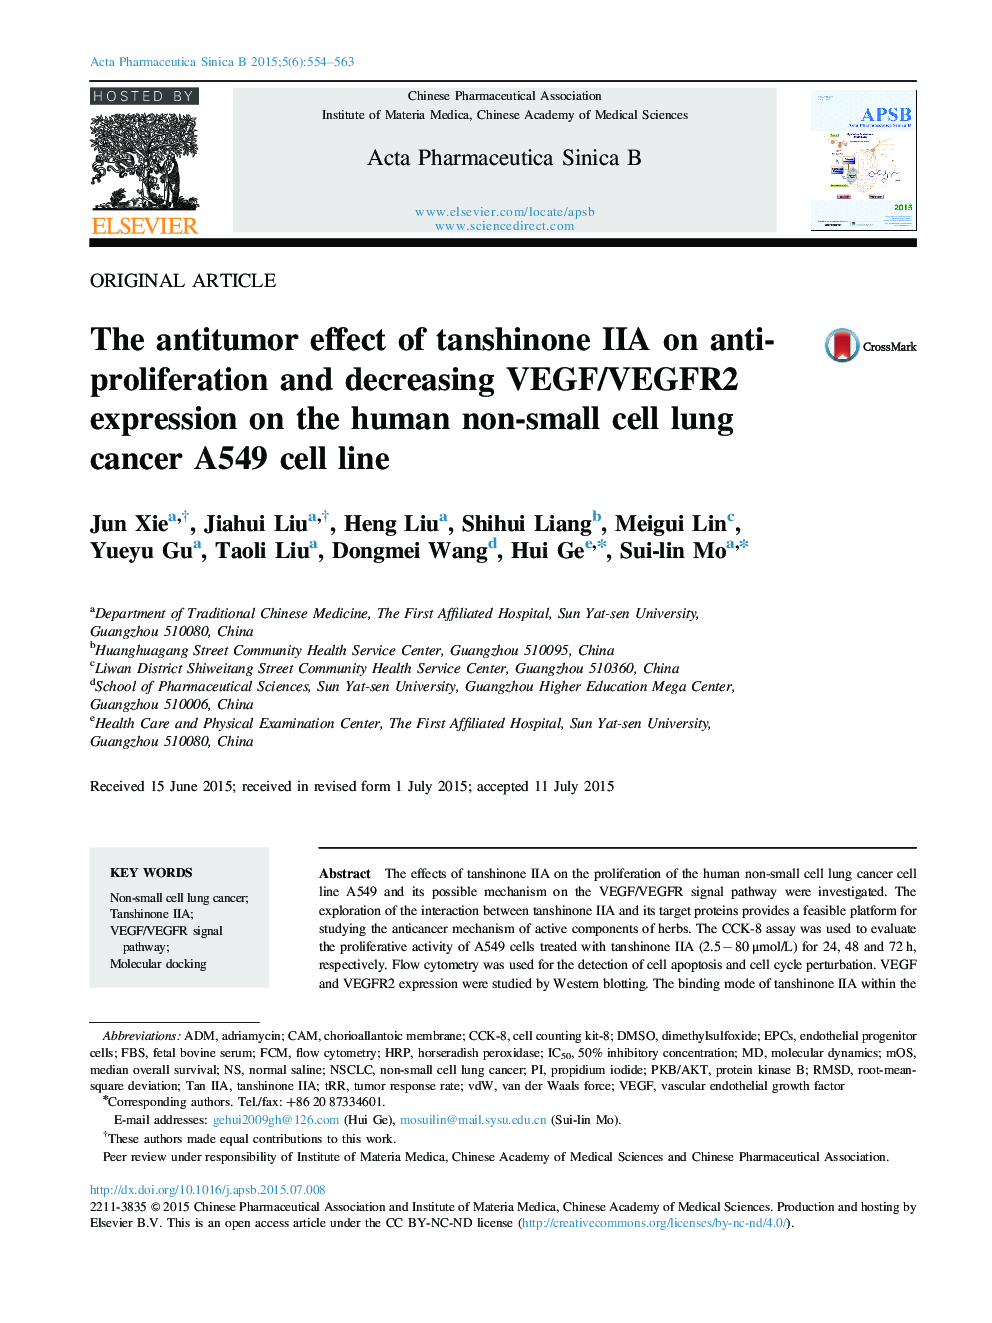 The antitumor effect of tanshinone IIA on anti-proliferation and decreasing VEGF/VEGFR2 expression on the human non-small cell lung cancer A549 cell line 